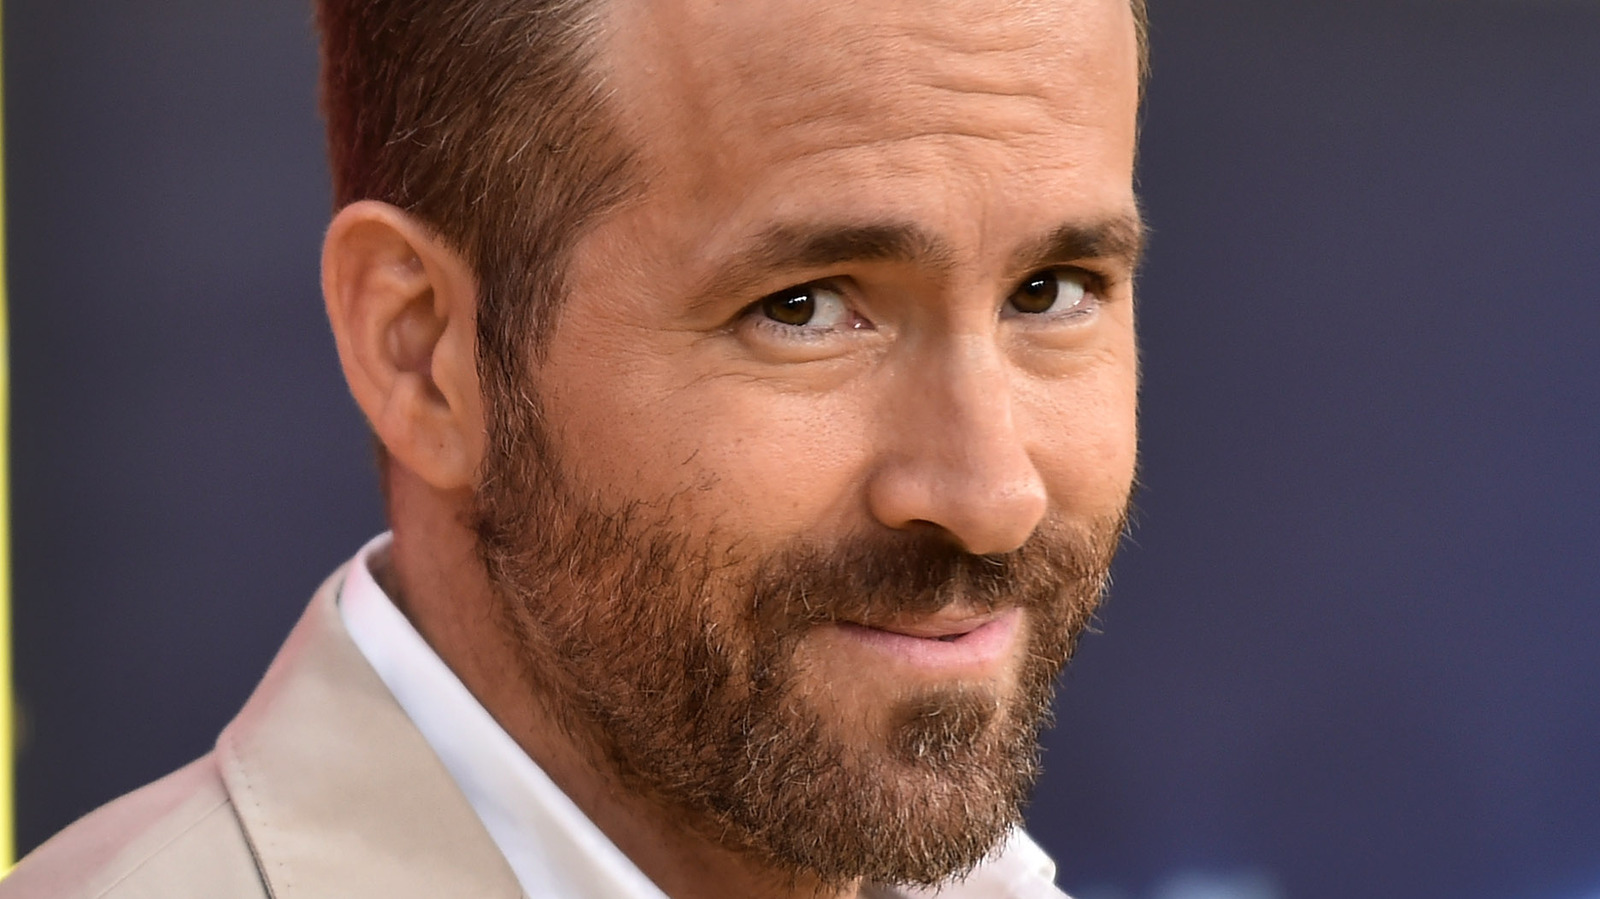 The Hockey Team Ryan Reynolds Is Reportedly Interested In Buying